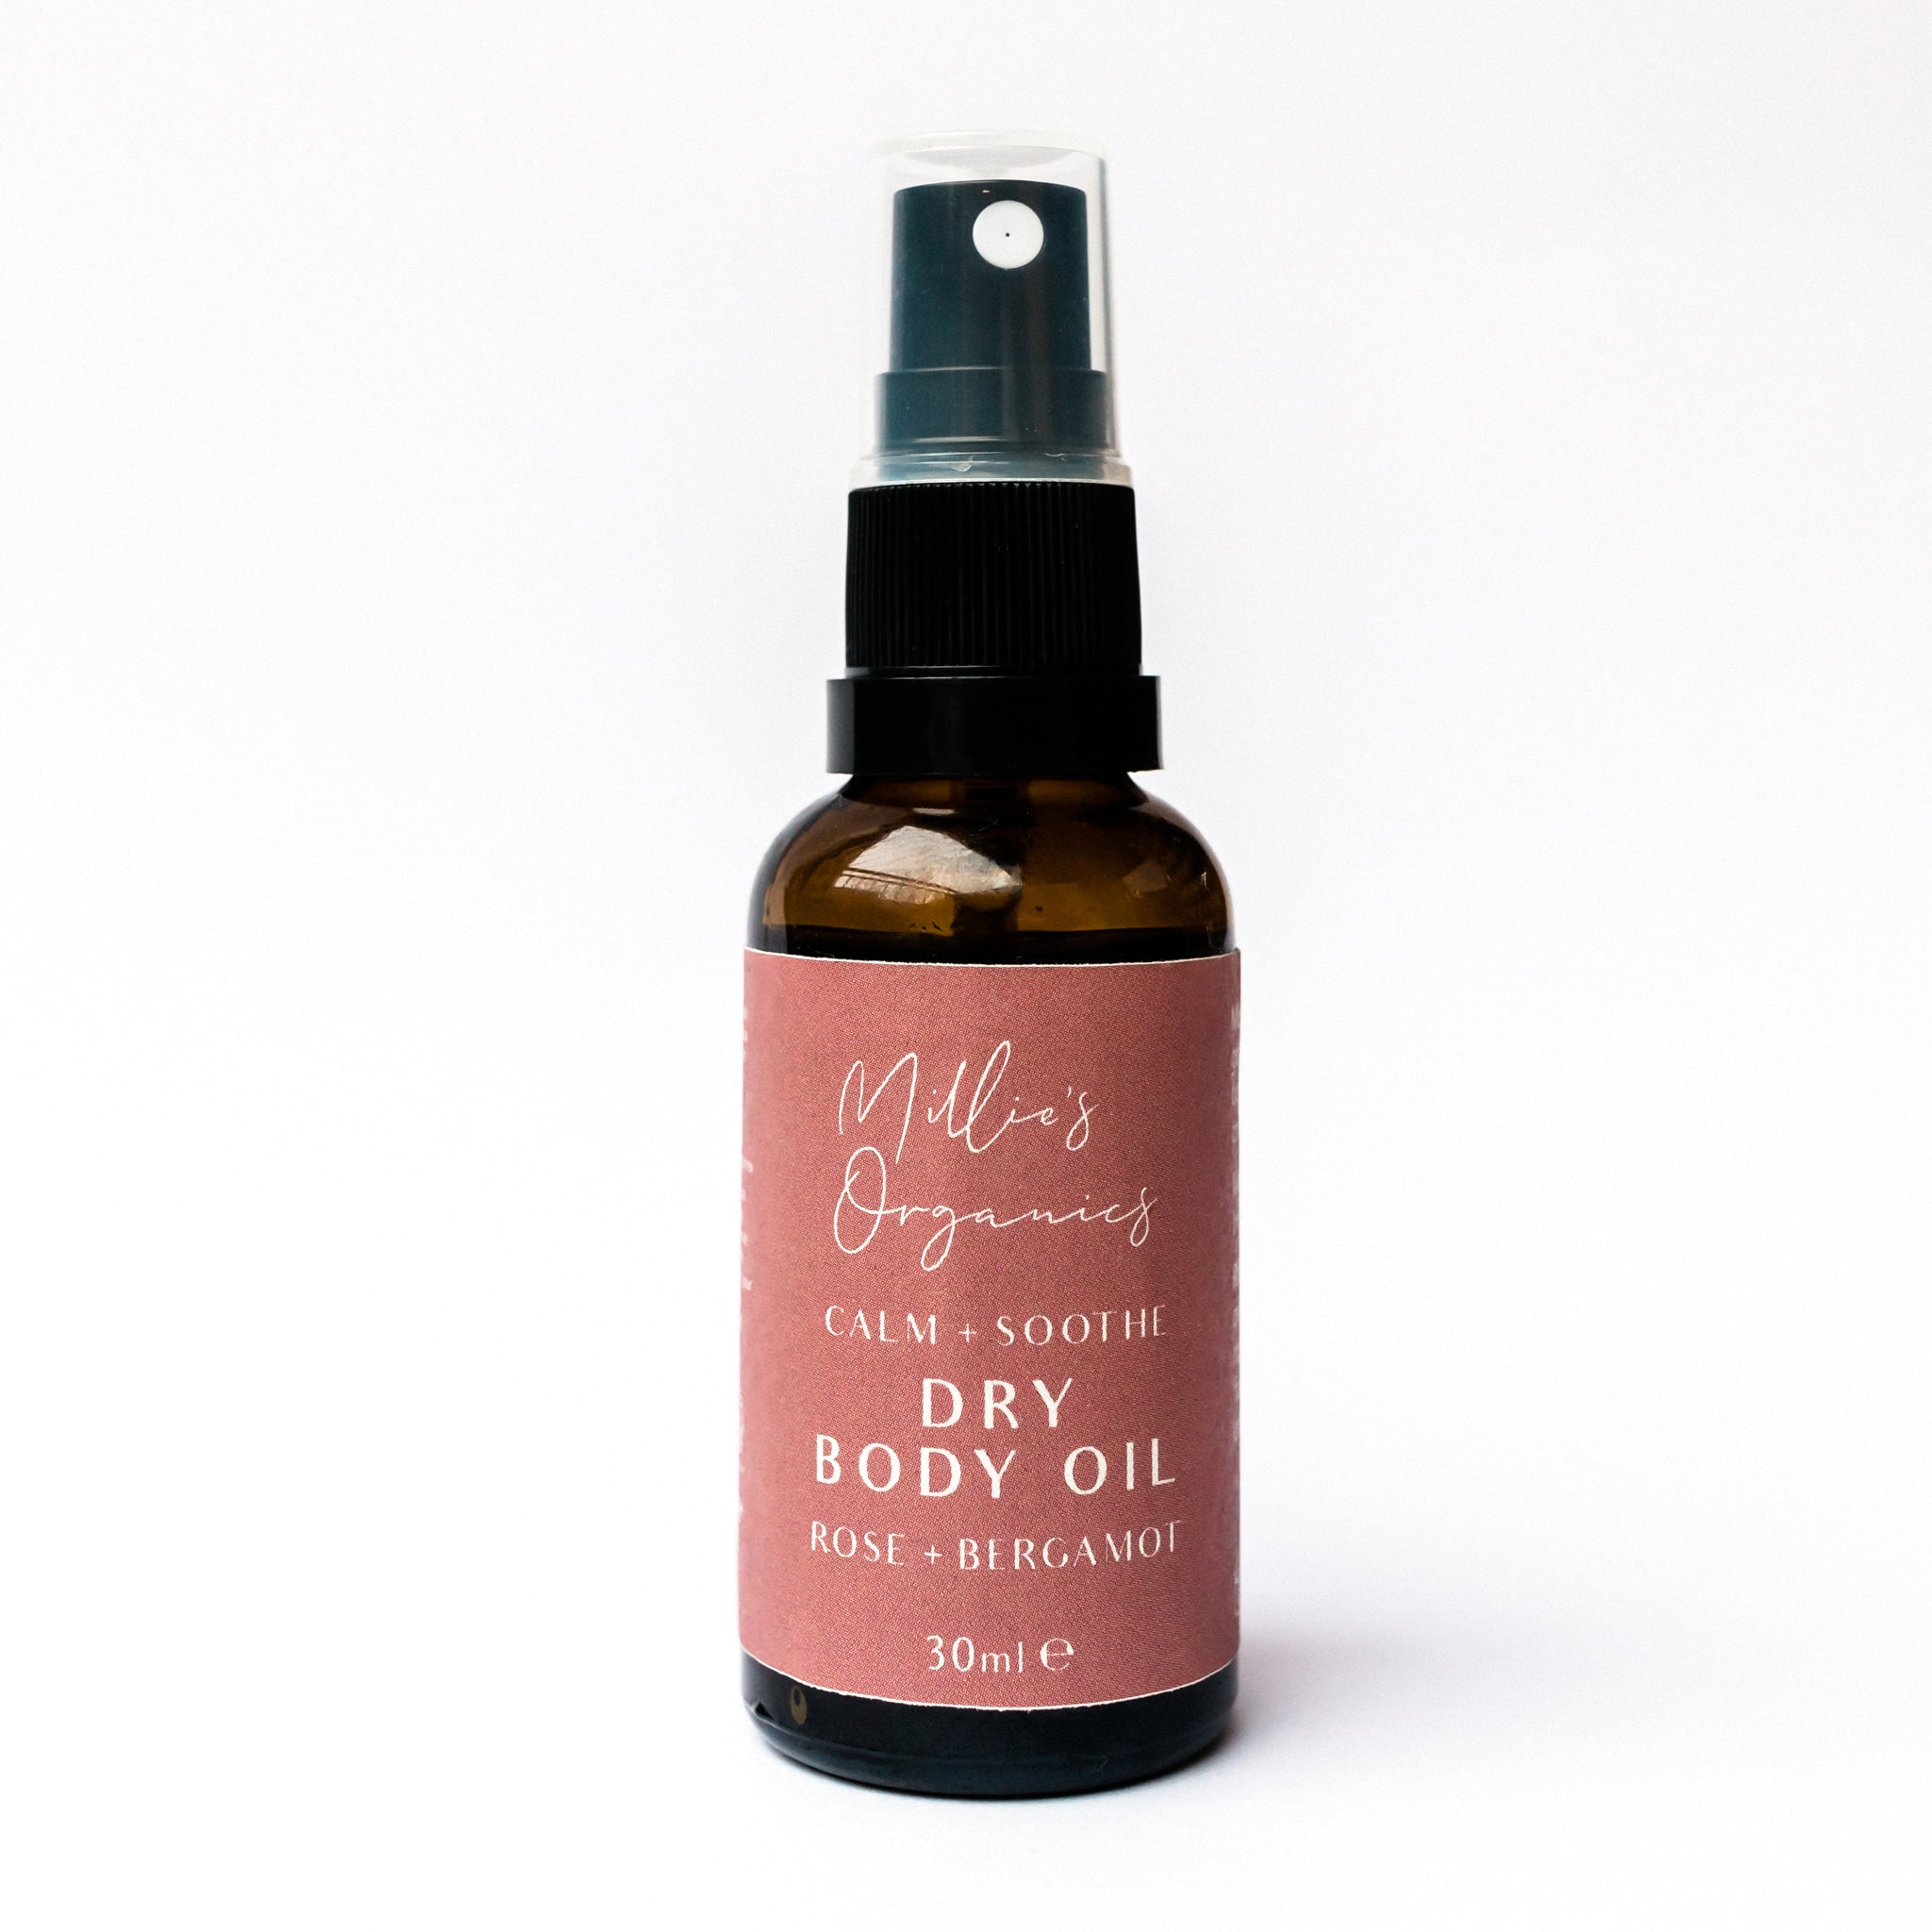 Limited Edition Rose and Bergamot Body Oil